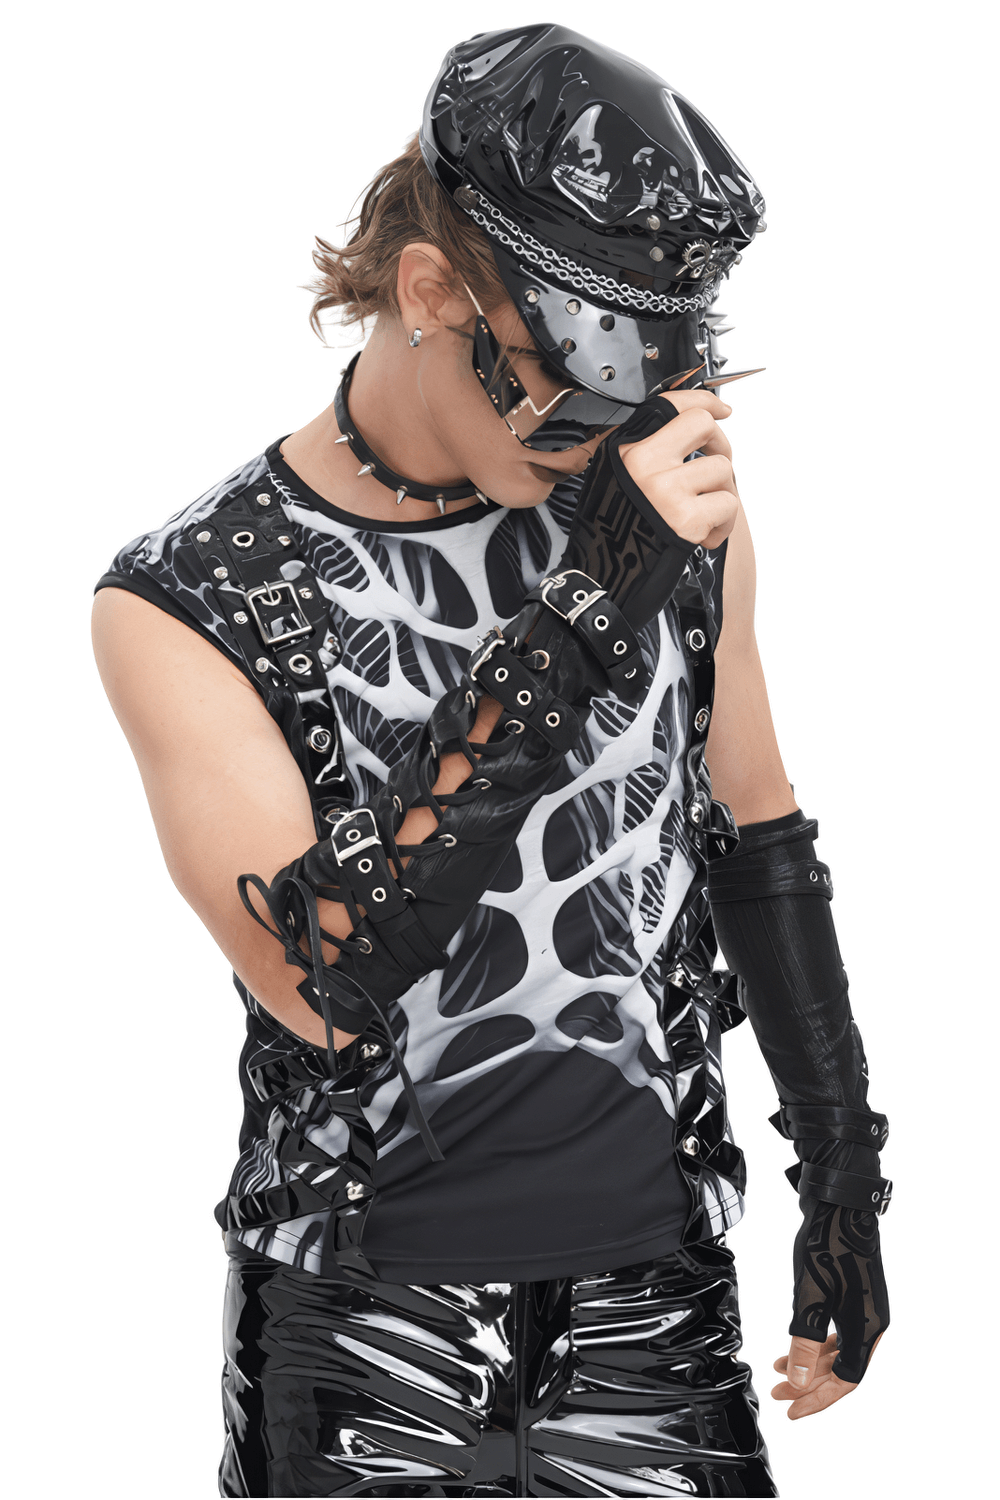 Cyberpunk Arm Gauntlets with Buckle Straps for Men